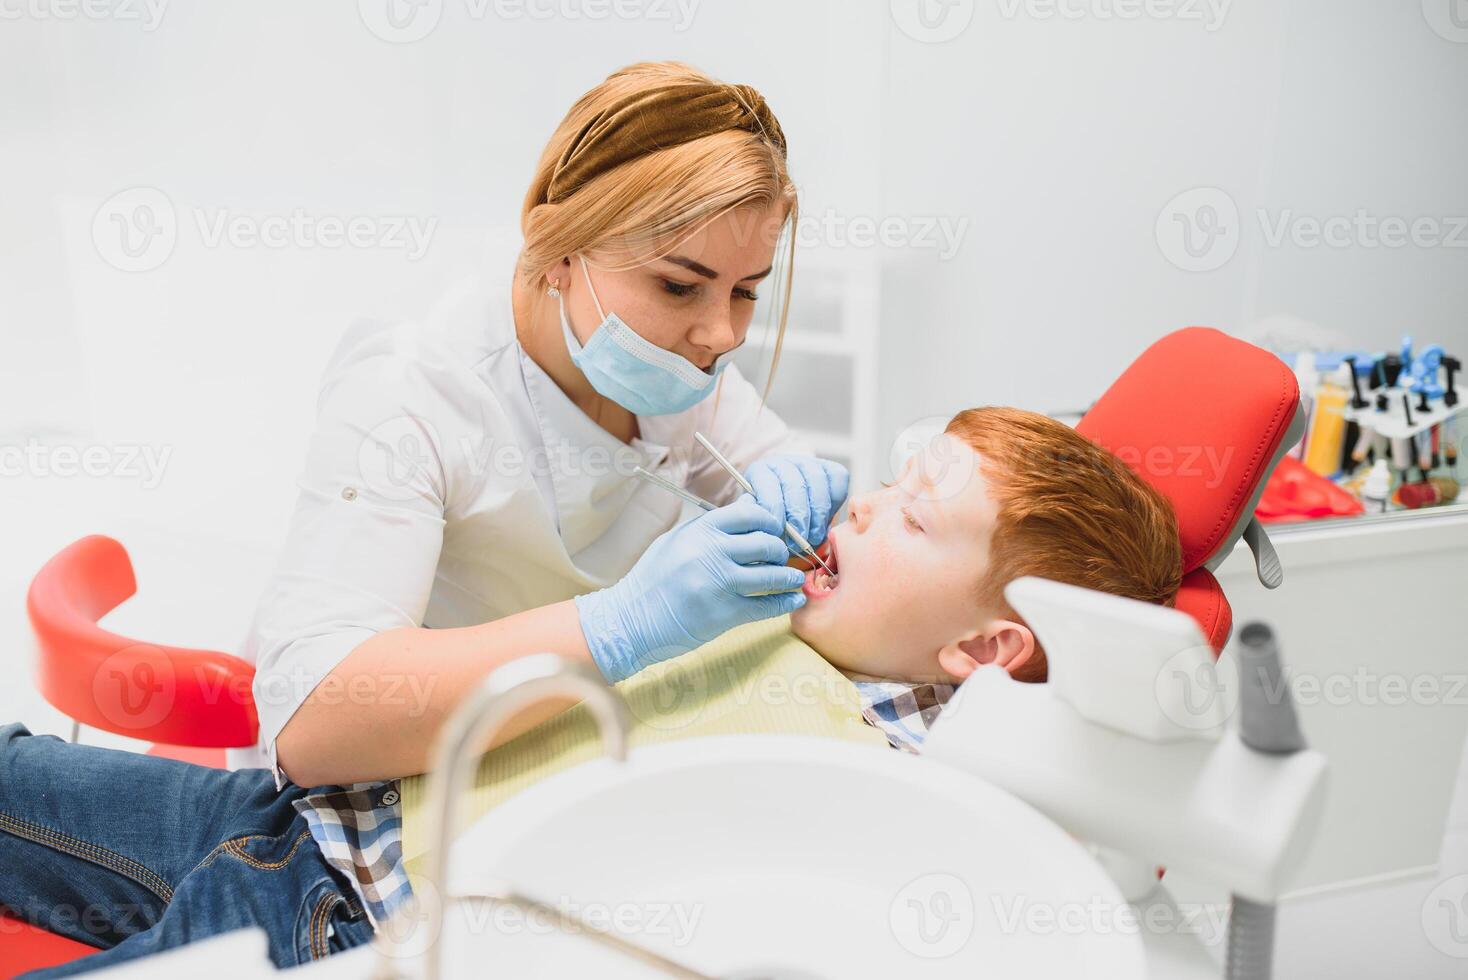 Boy satisfied with the service in the dental office. concept of pediatric dental treatment photo